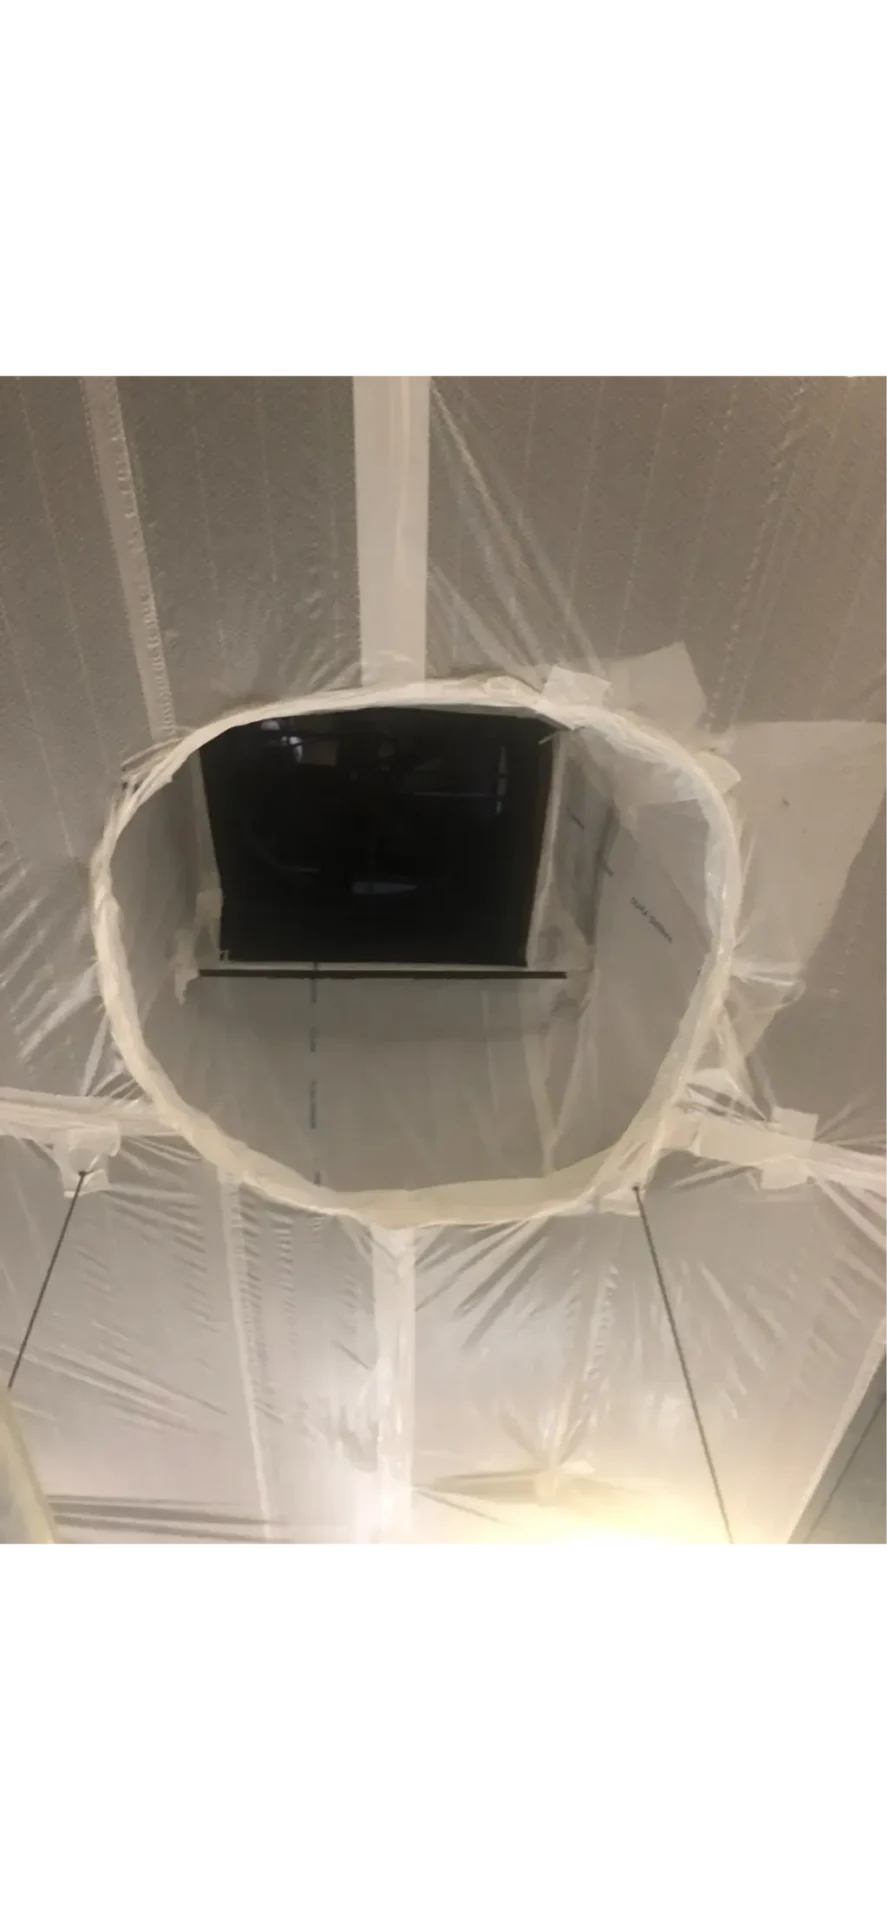 Ventilation for temporary suspended ceiling covers